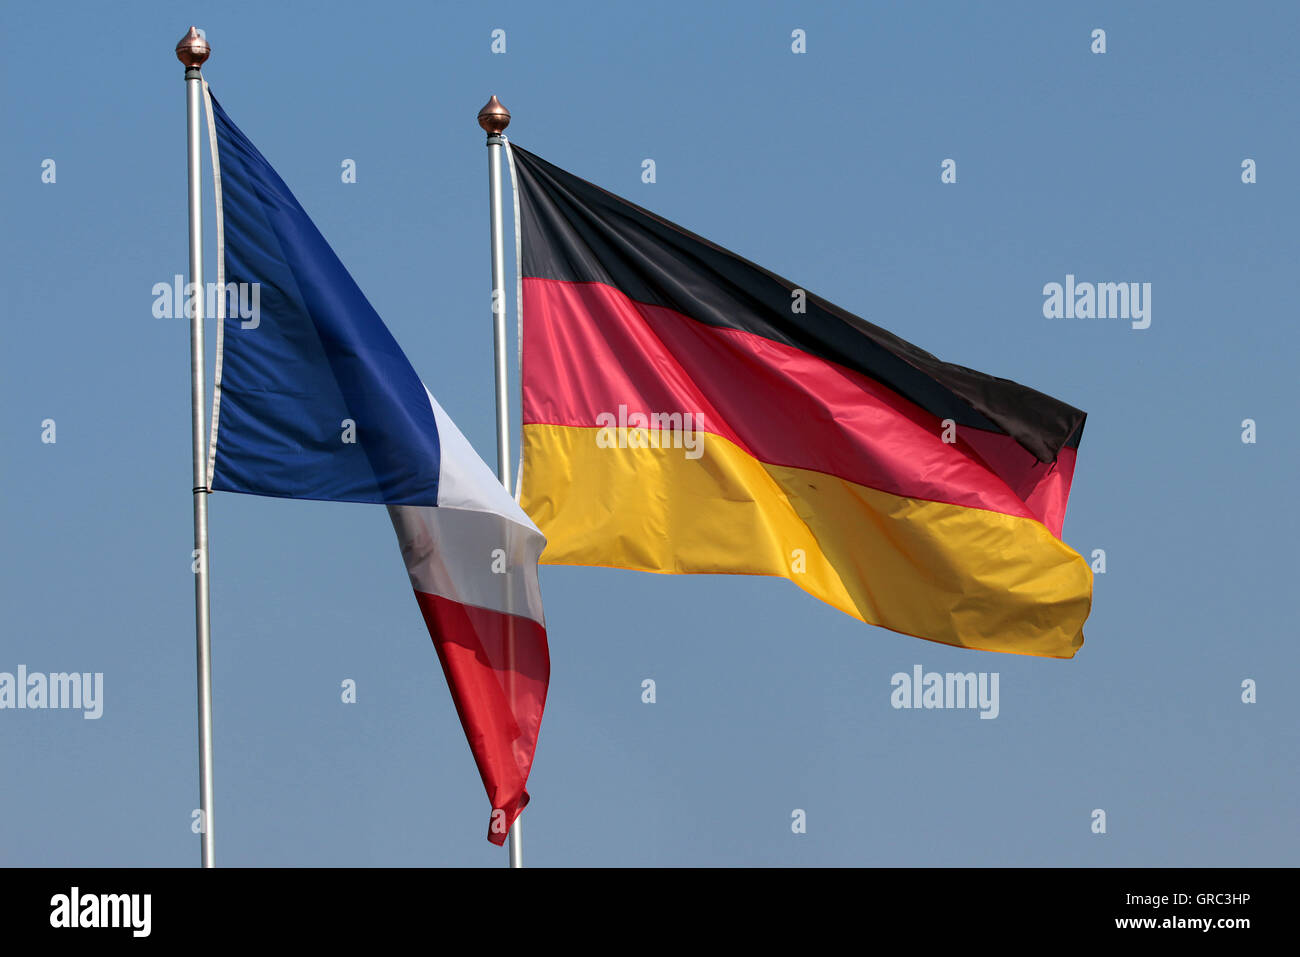 German Flag Blowing In The Wind Whlie French Flag Hangs Down In Still Air Stock Photo